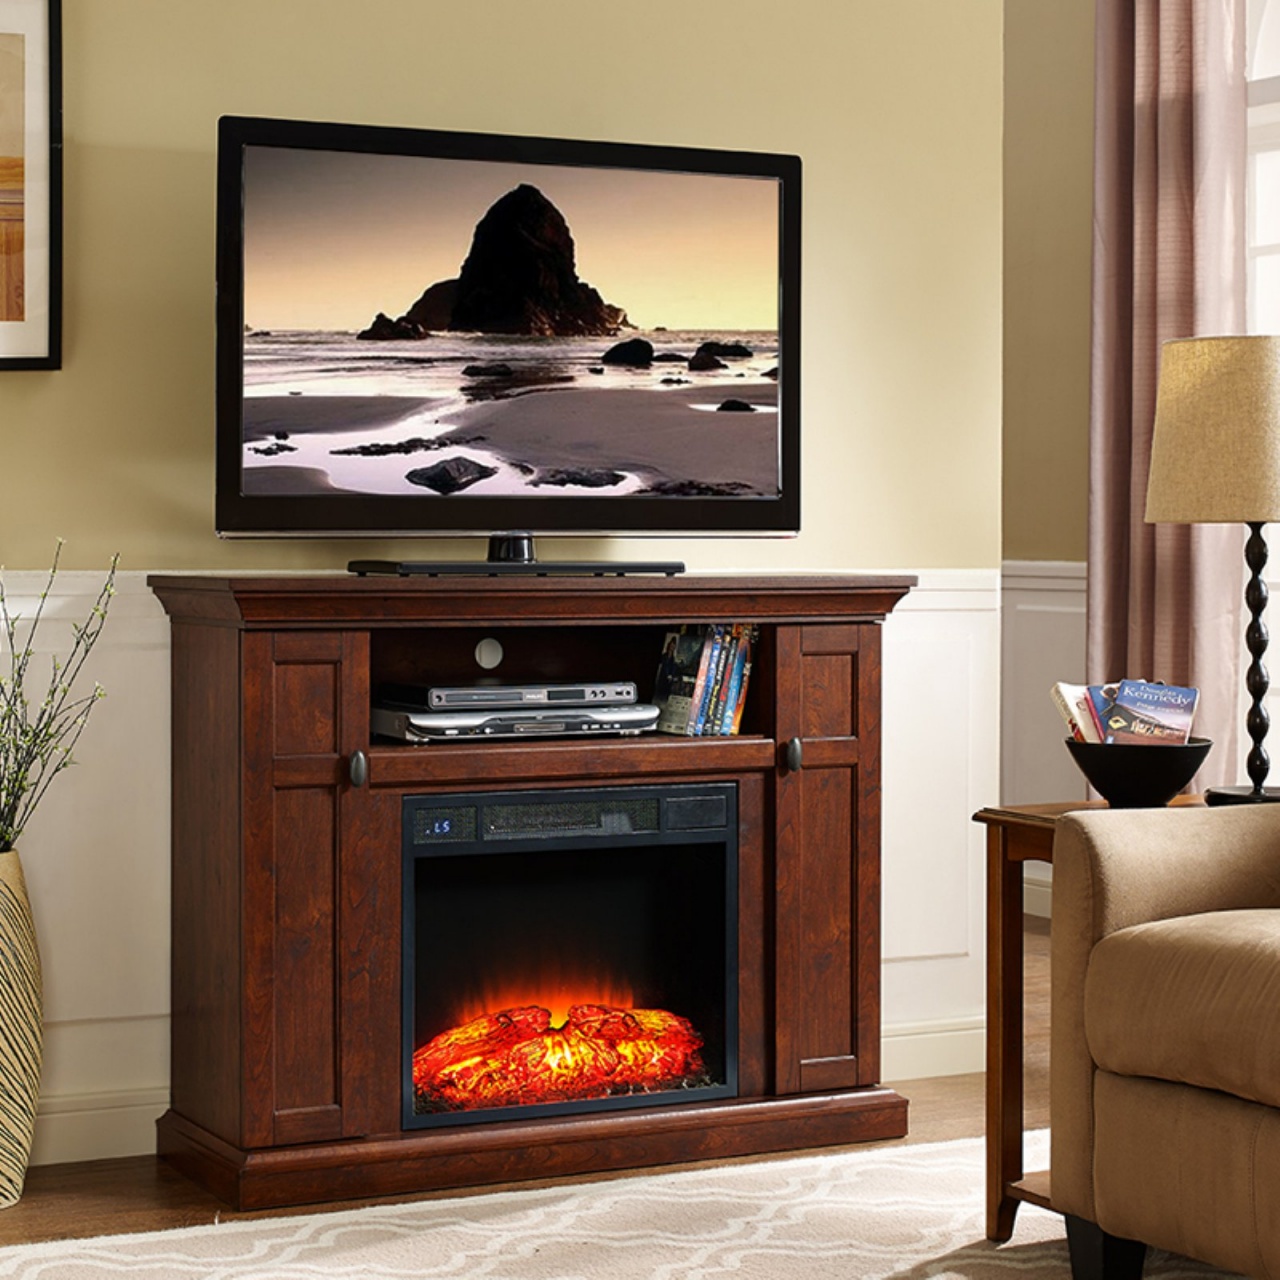 Tv Fireplace Wall Unit Designs Luxury Built In Wall Electric Fireplace – Fireplace Ideas From